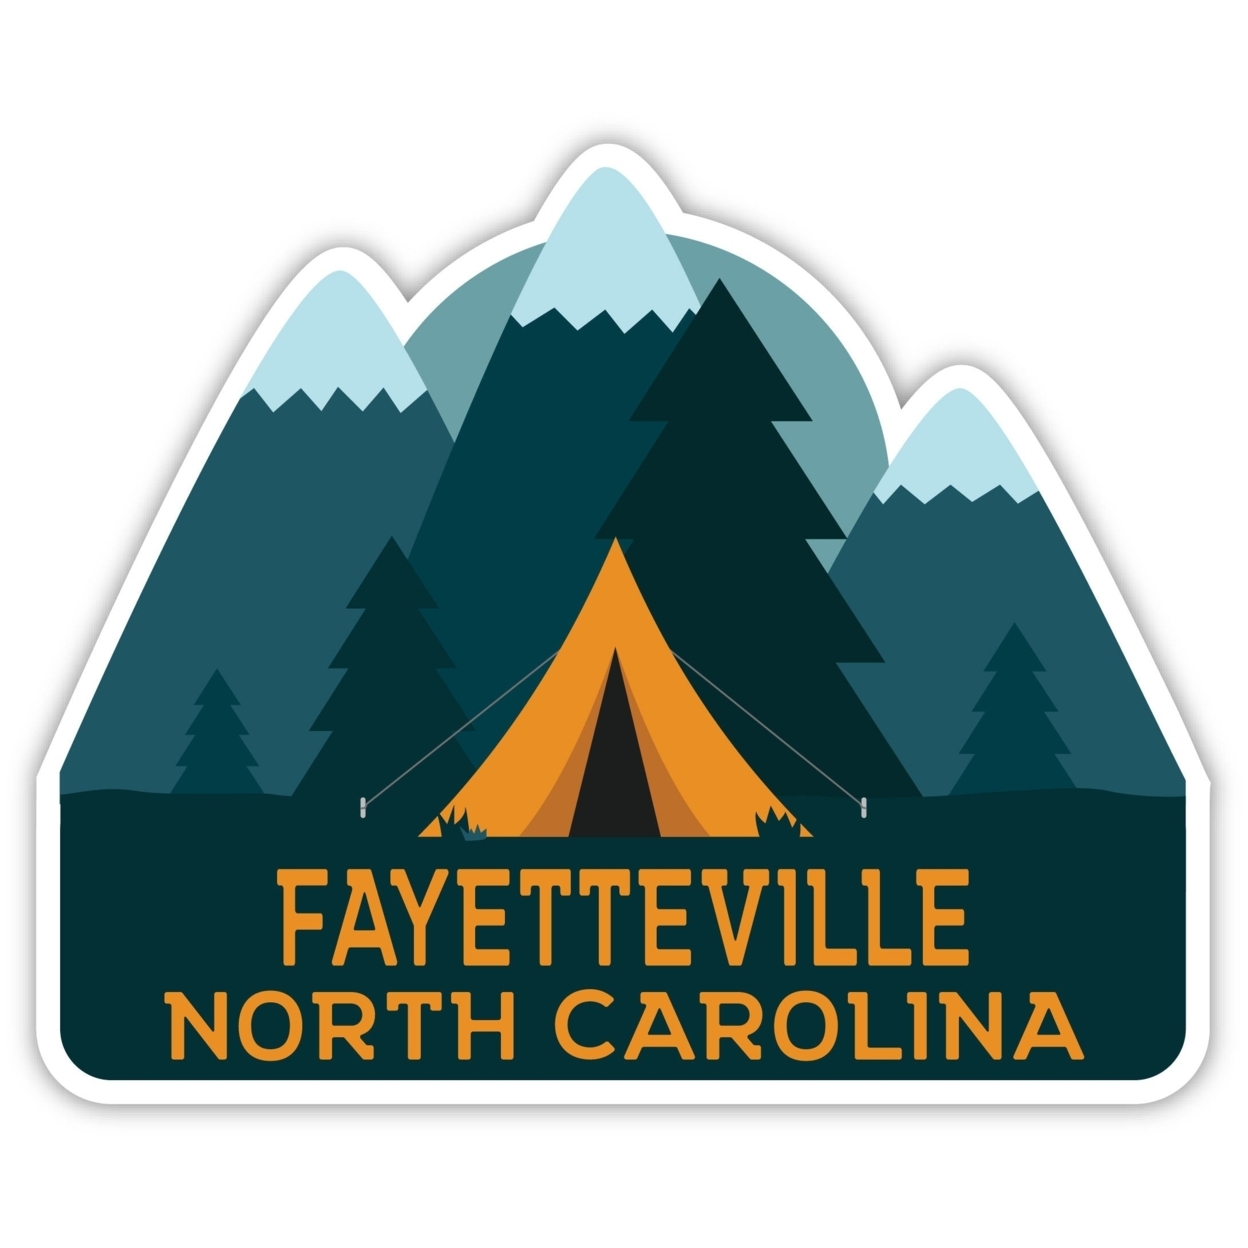 Fayetteville North Carolina Souvenir Decorative Stickers (Choose Theme And Size) - 4-Pack, 4-Inch, Tent